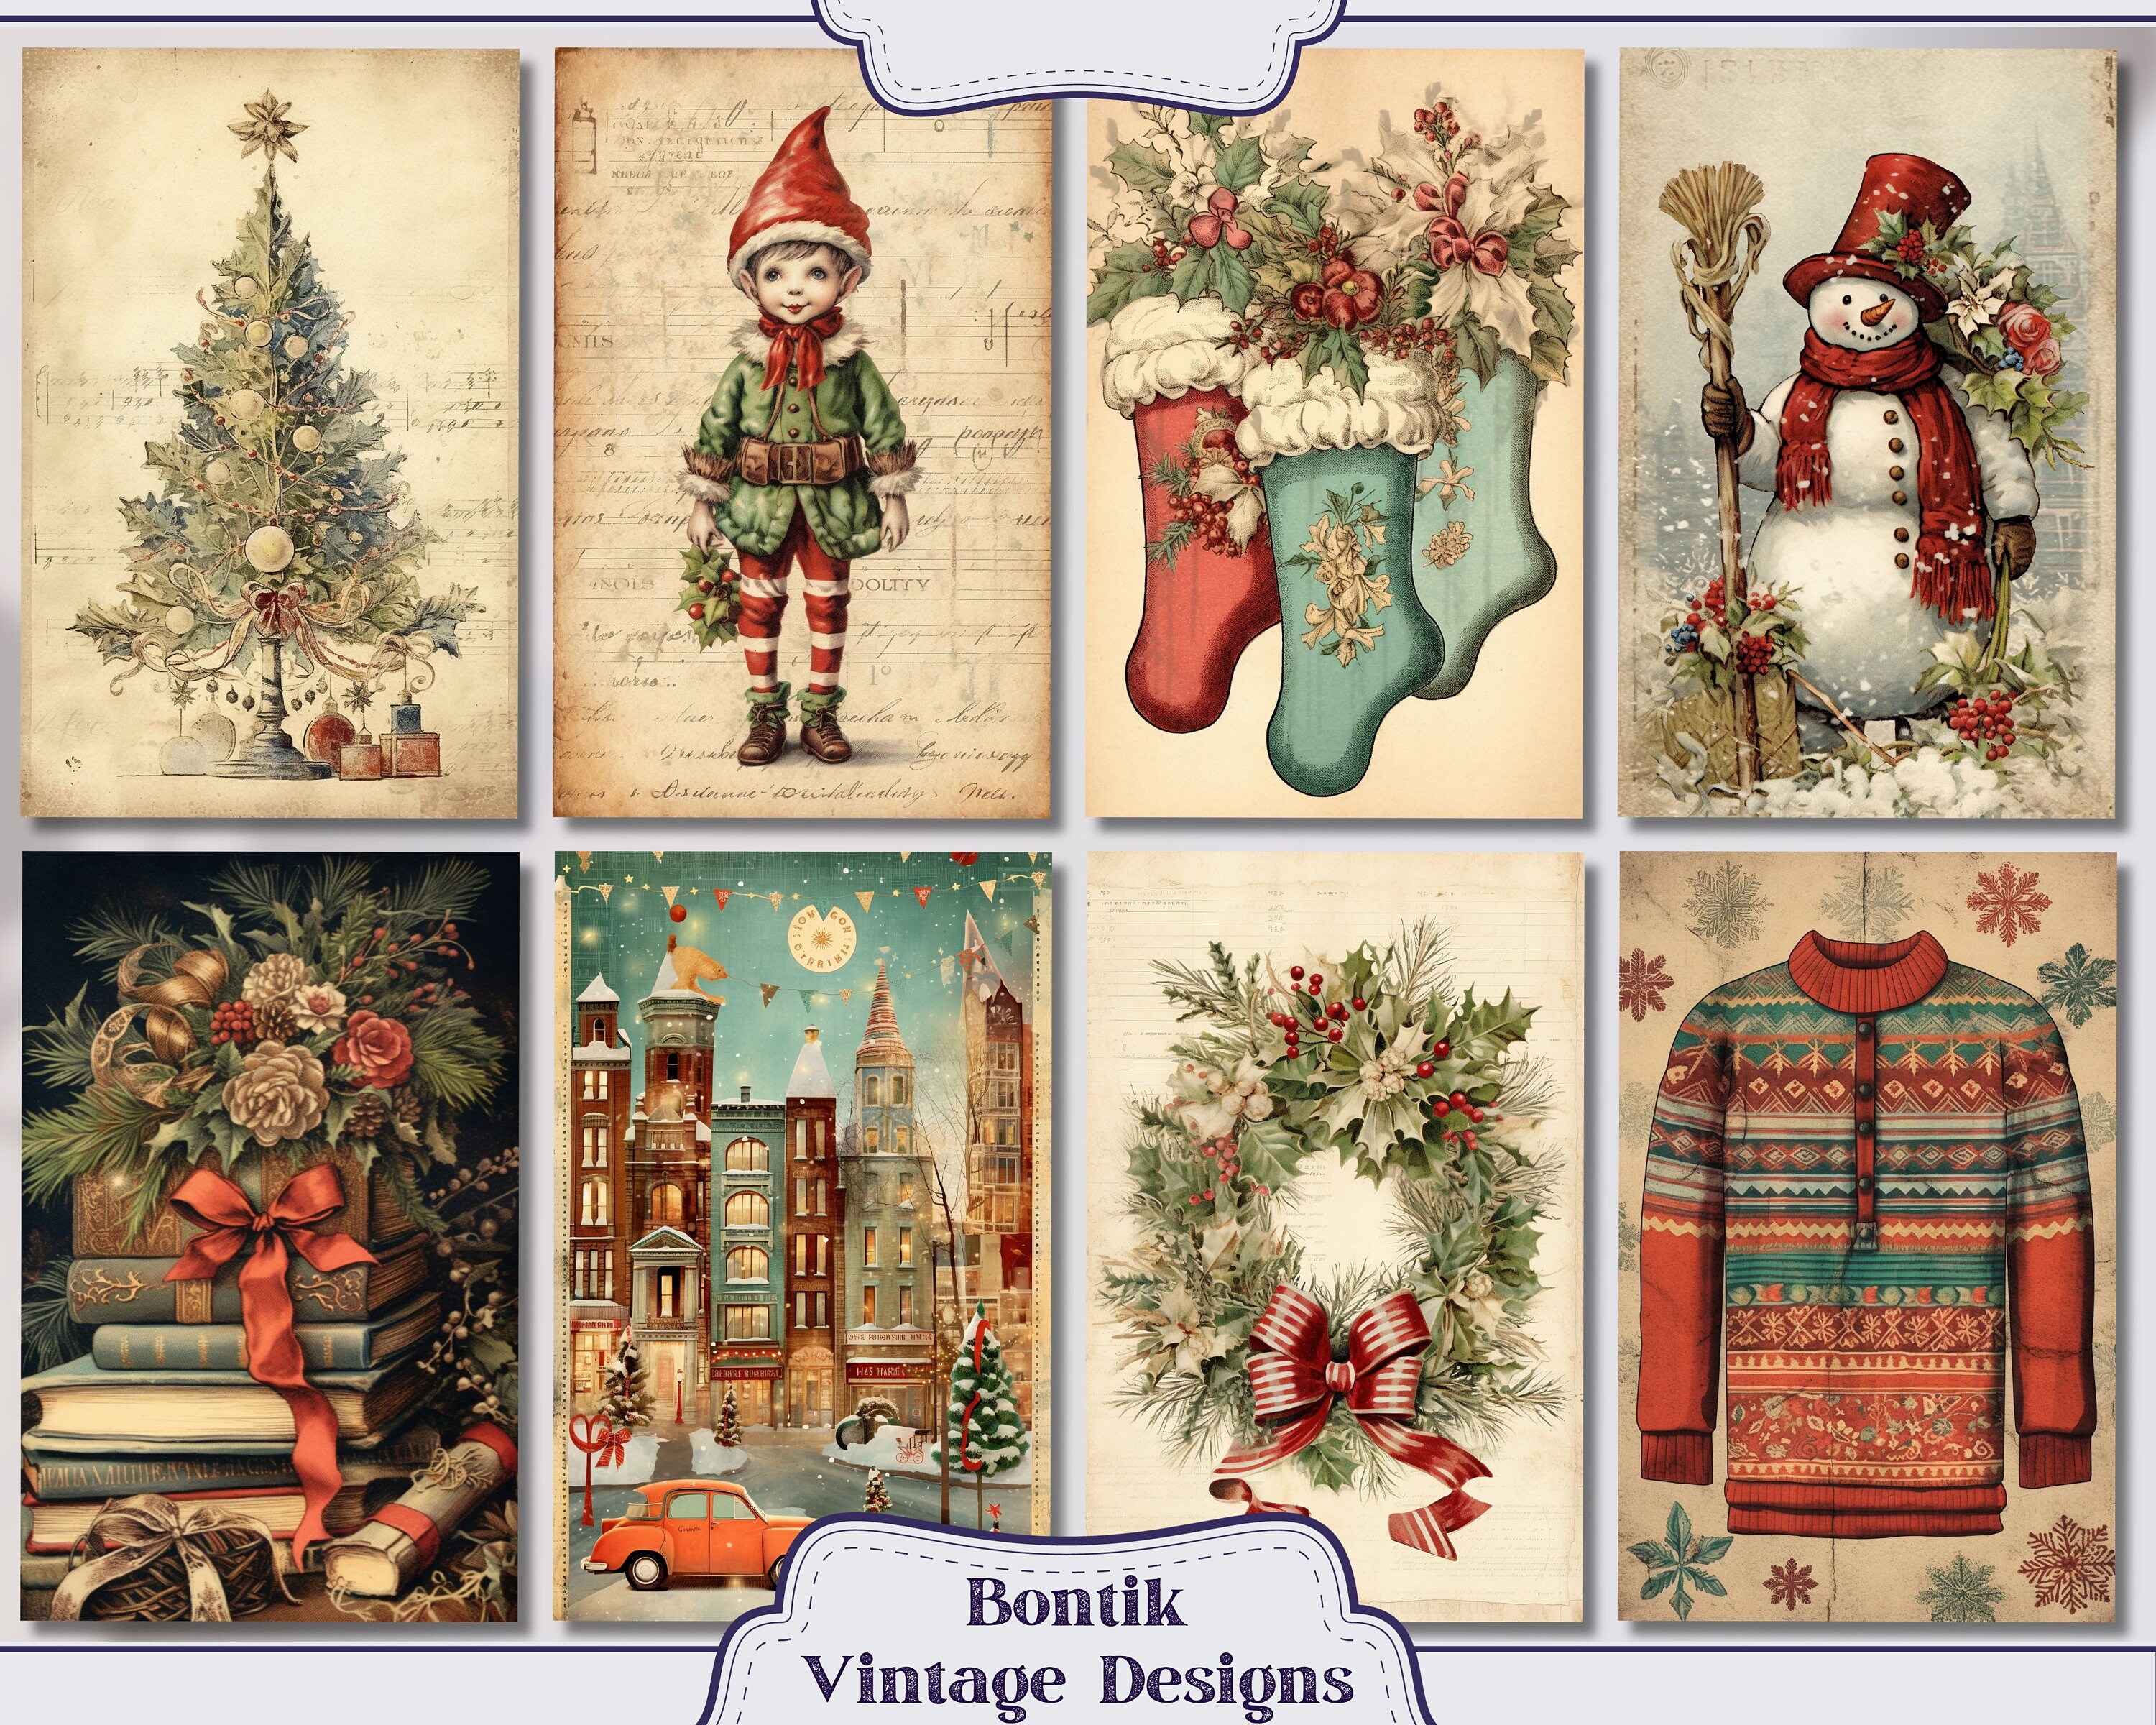 Vintage Winter Time Ephemera for Junk Journals: Christmas Winter Scenes Collage  Books Art Cut Out for Junk Journals, Crafts and Scrapbooking. Vintage   Embellishments for Paper Crafts and Glue Book : Amanta